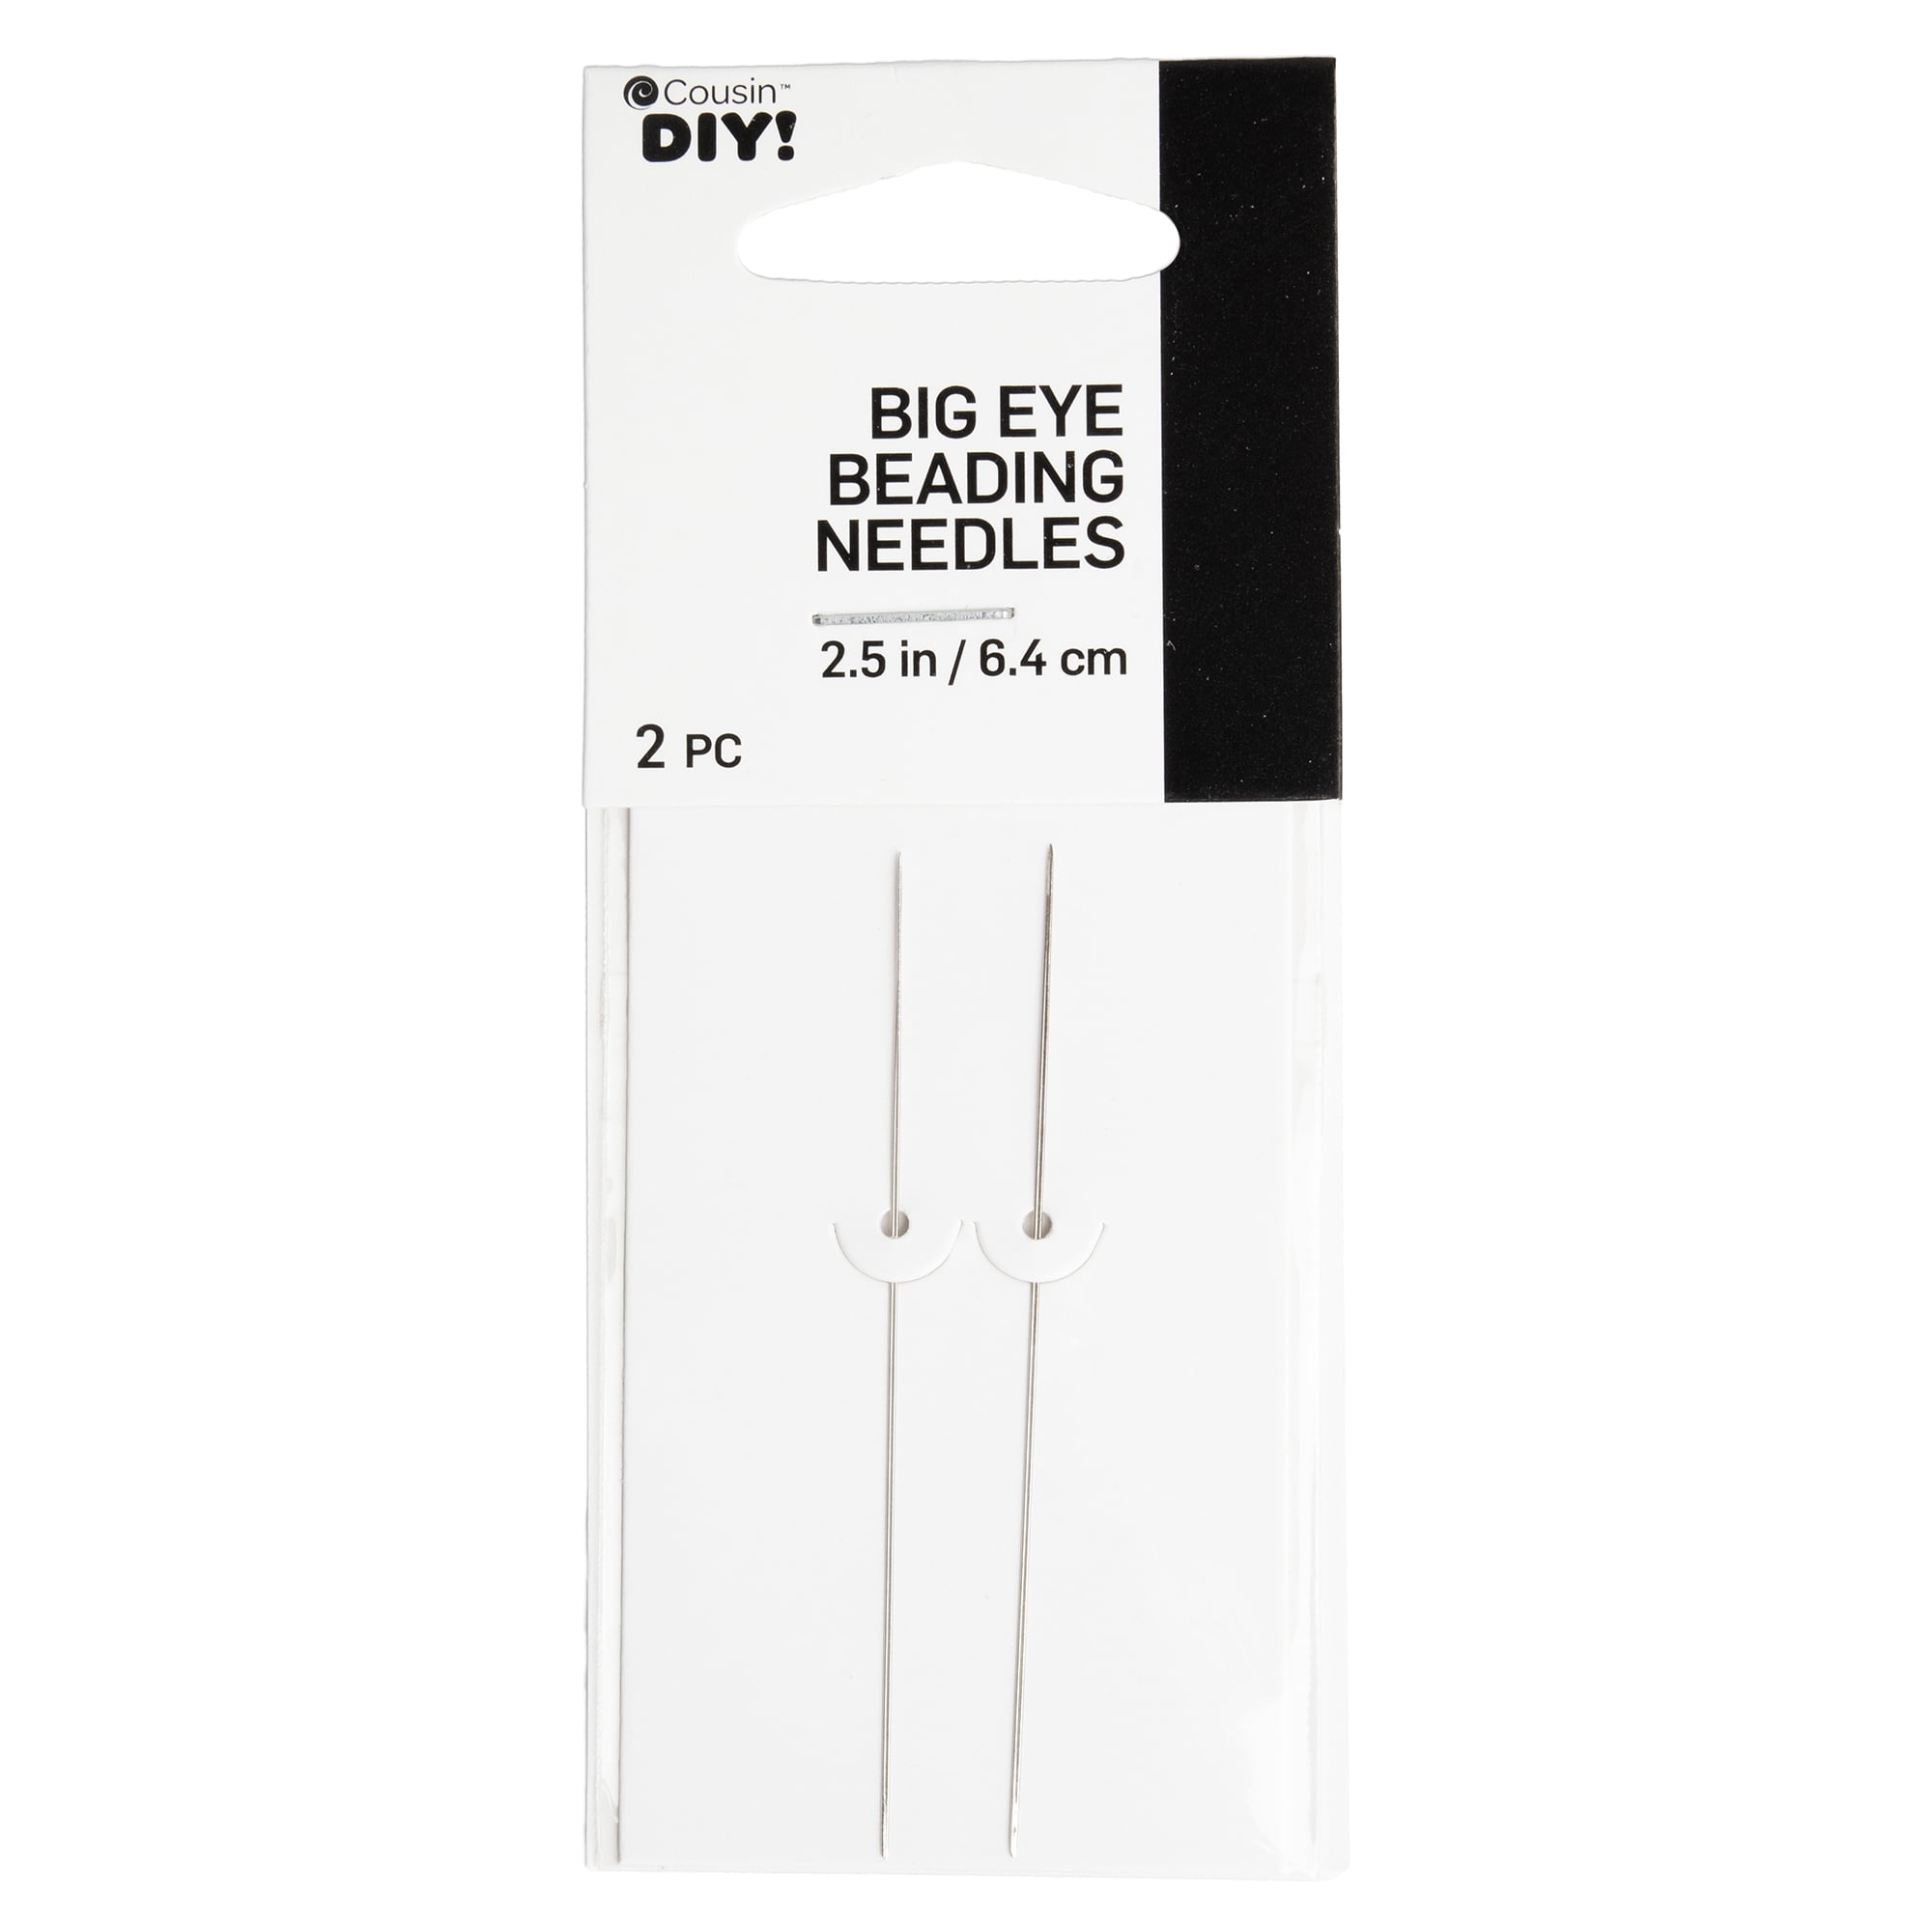 Cousin DIY 2.5 in. Big Eye Beading Needles, Silver, Steel, 2 Pc. Unisex for  Adults